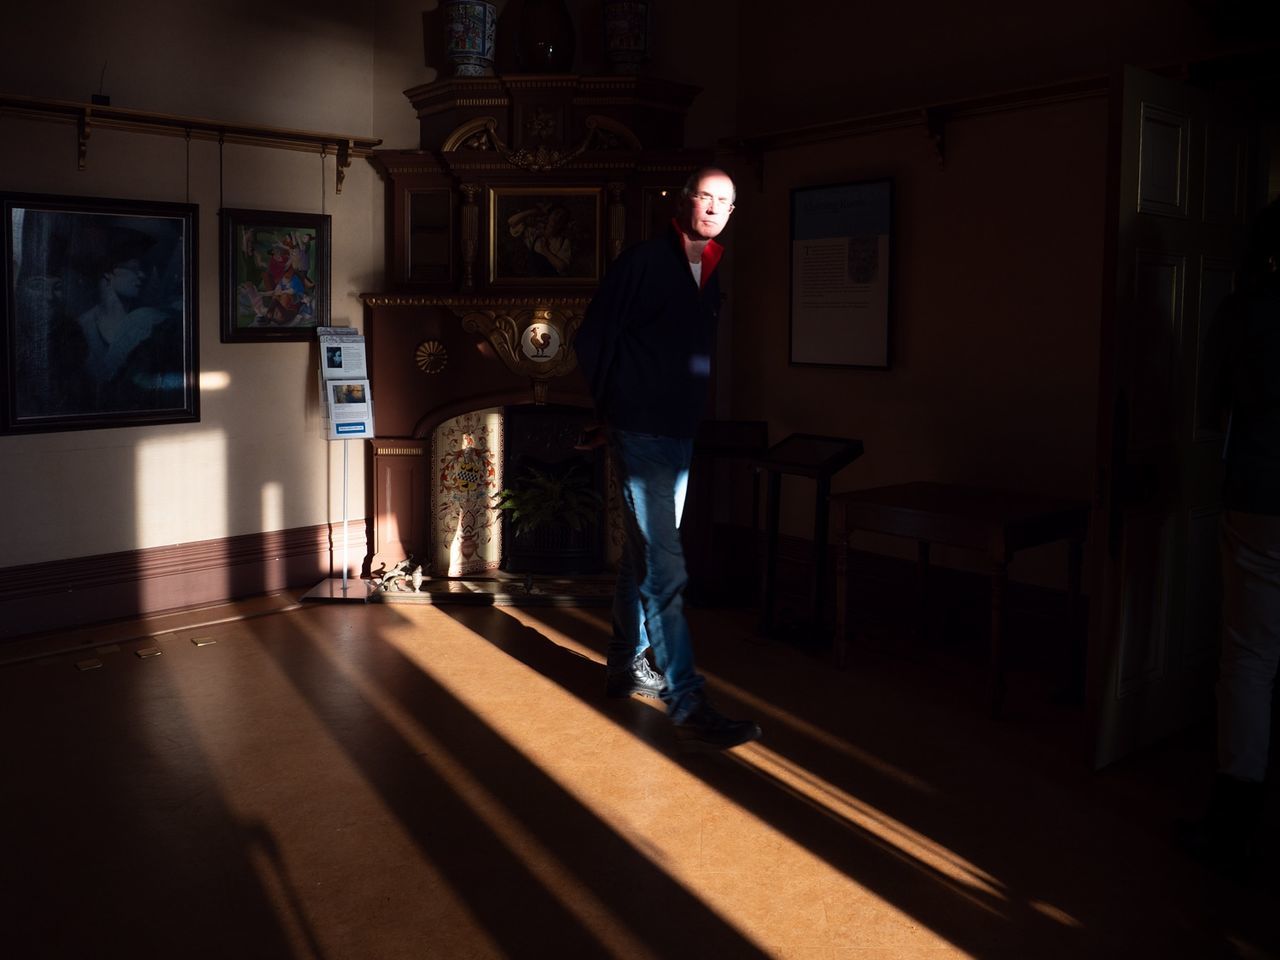 standing, one person, real people, full length, lifestyles, sunlight, indoors, casual clothing, home interior, men, architecture, shadow, young adult, built structure, adult, leisure activity, young men, house, dark, contemplation